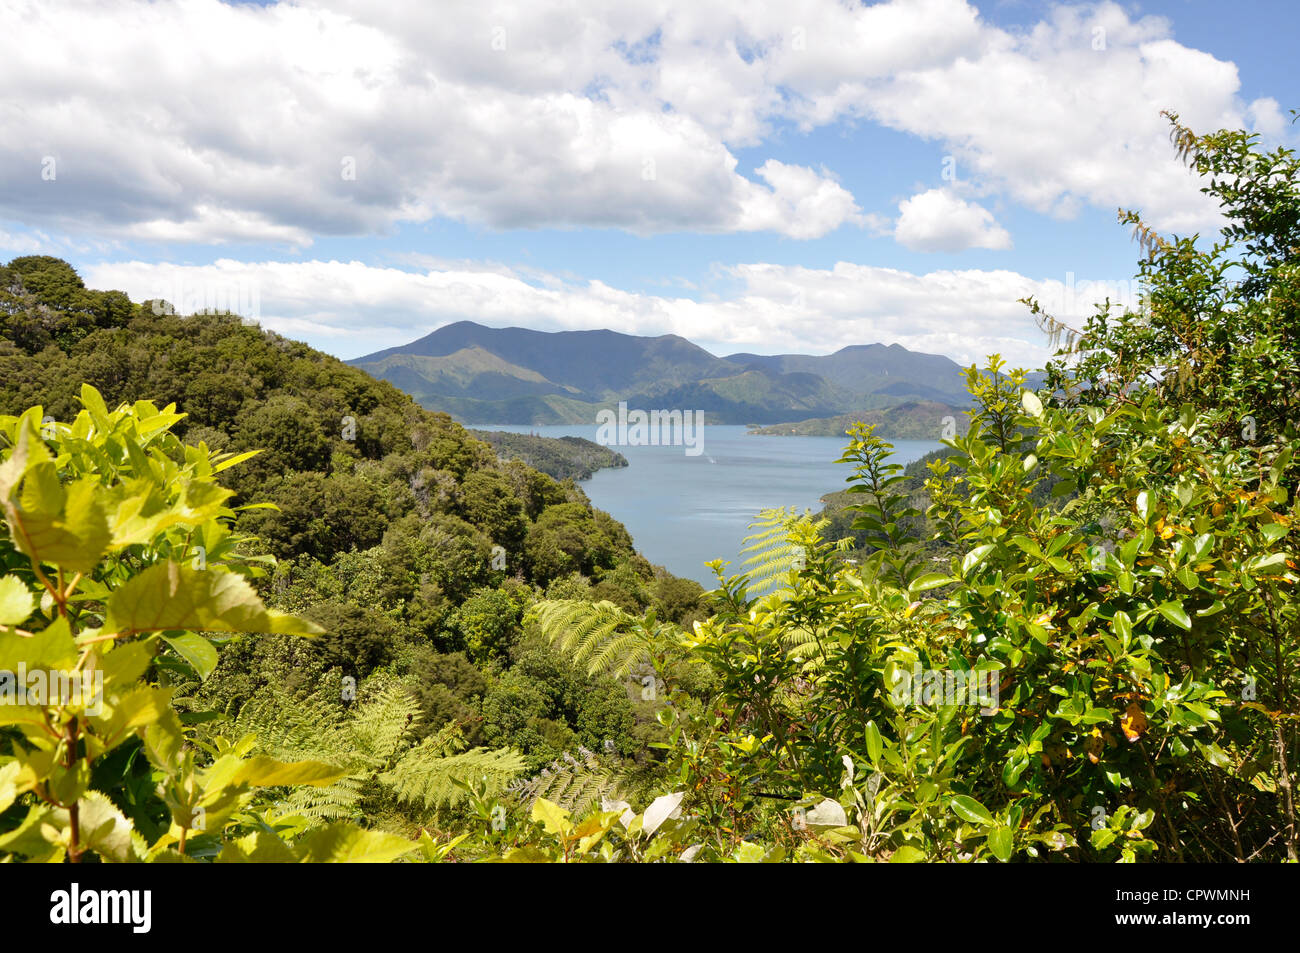 View of the Queen Charlotte Sound as seen from the Queen Charlotte Drive, Marlborough Sounds, South Island, New Zealand Stock Photo